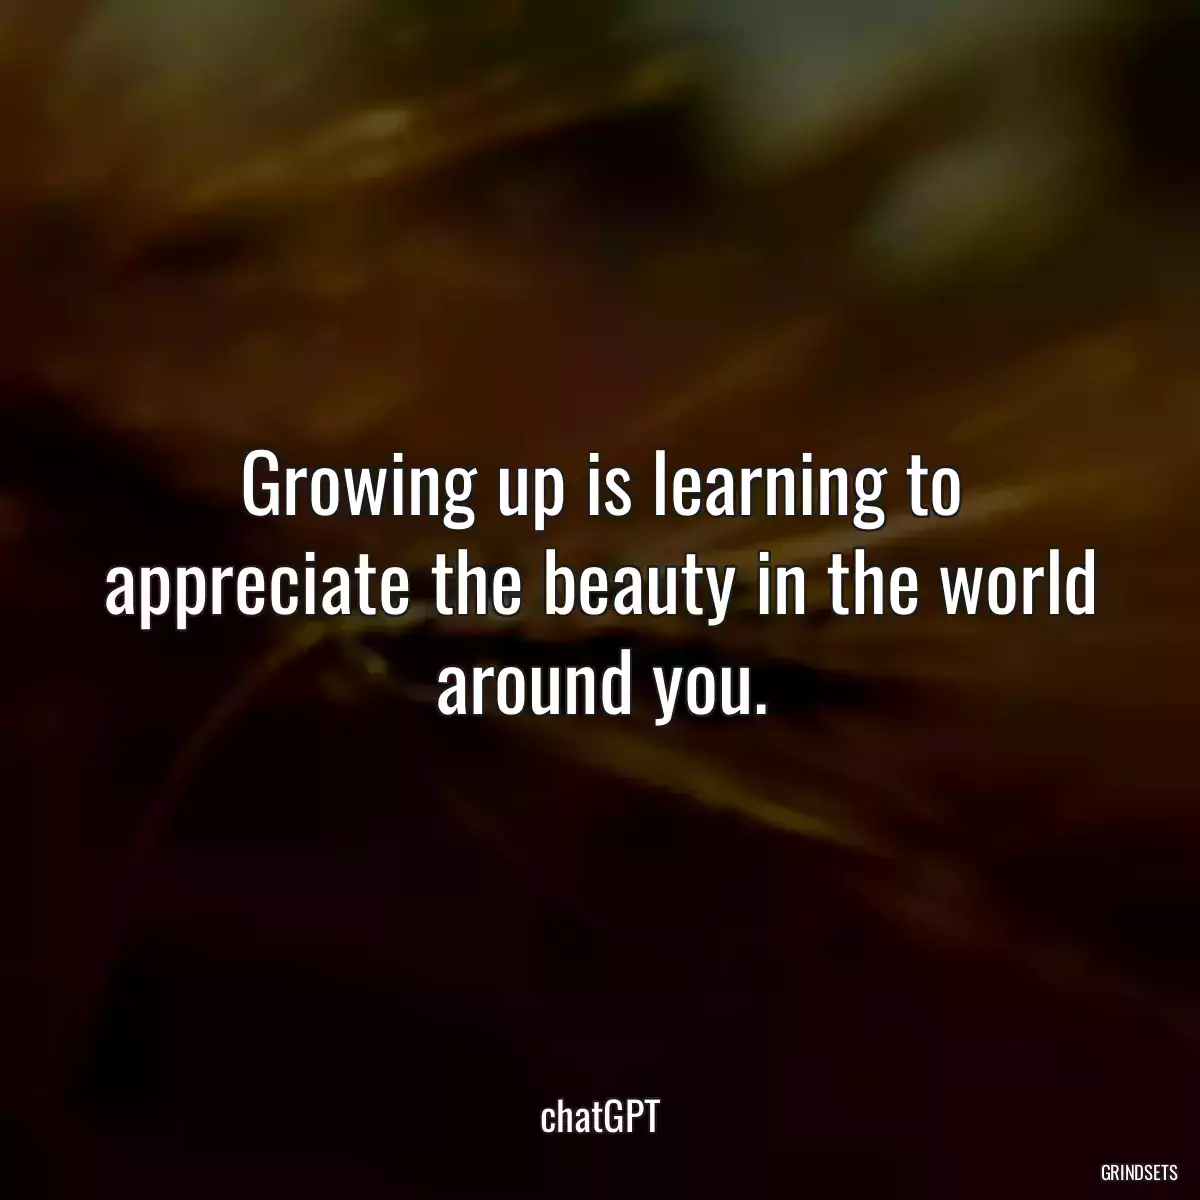 Growing up is learning to appreciate the beauty in the world around you.